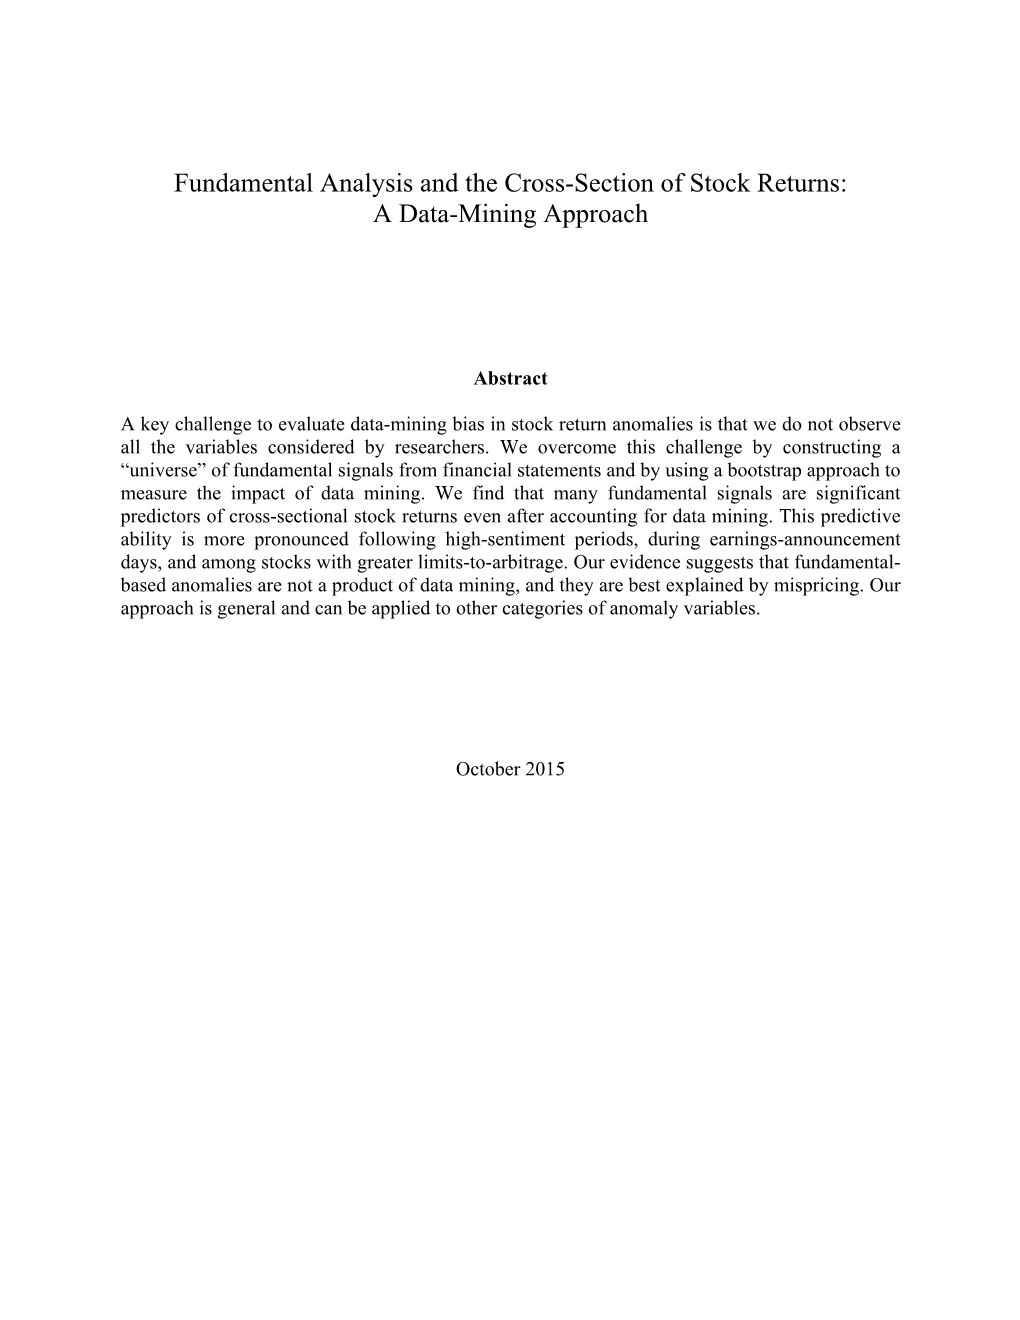 Fundamental Analysis and the Cross-Section of Stock Returns: a Data-Mining Approach